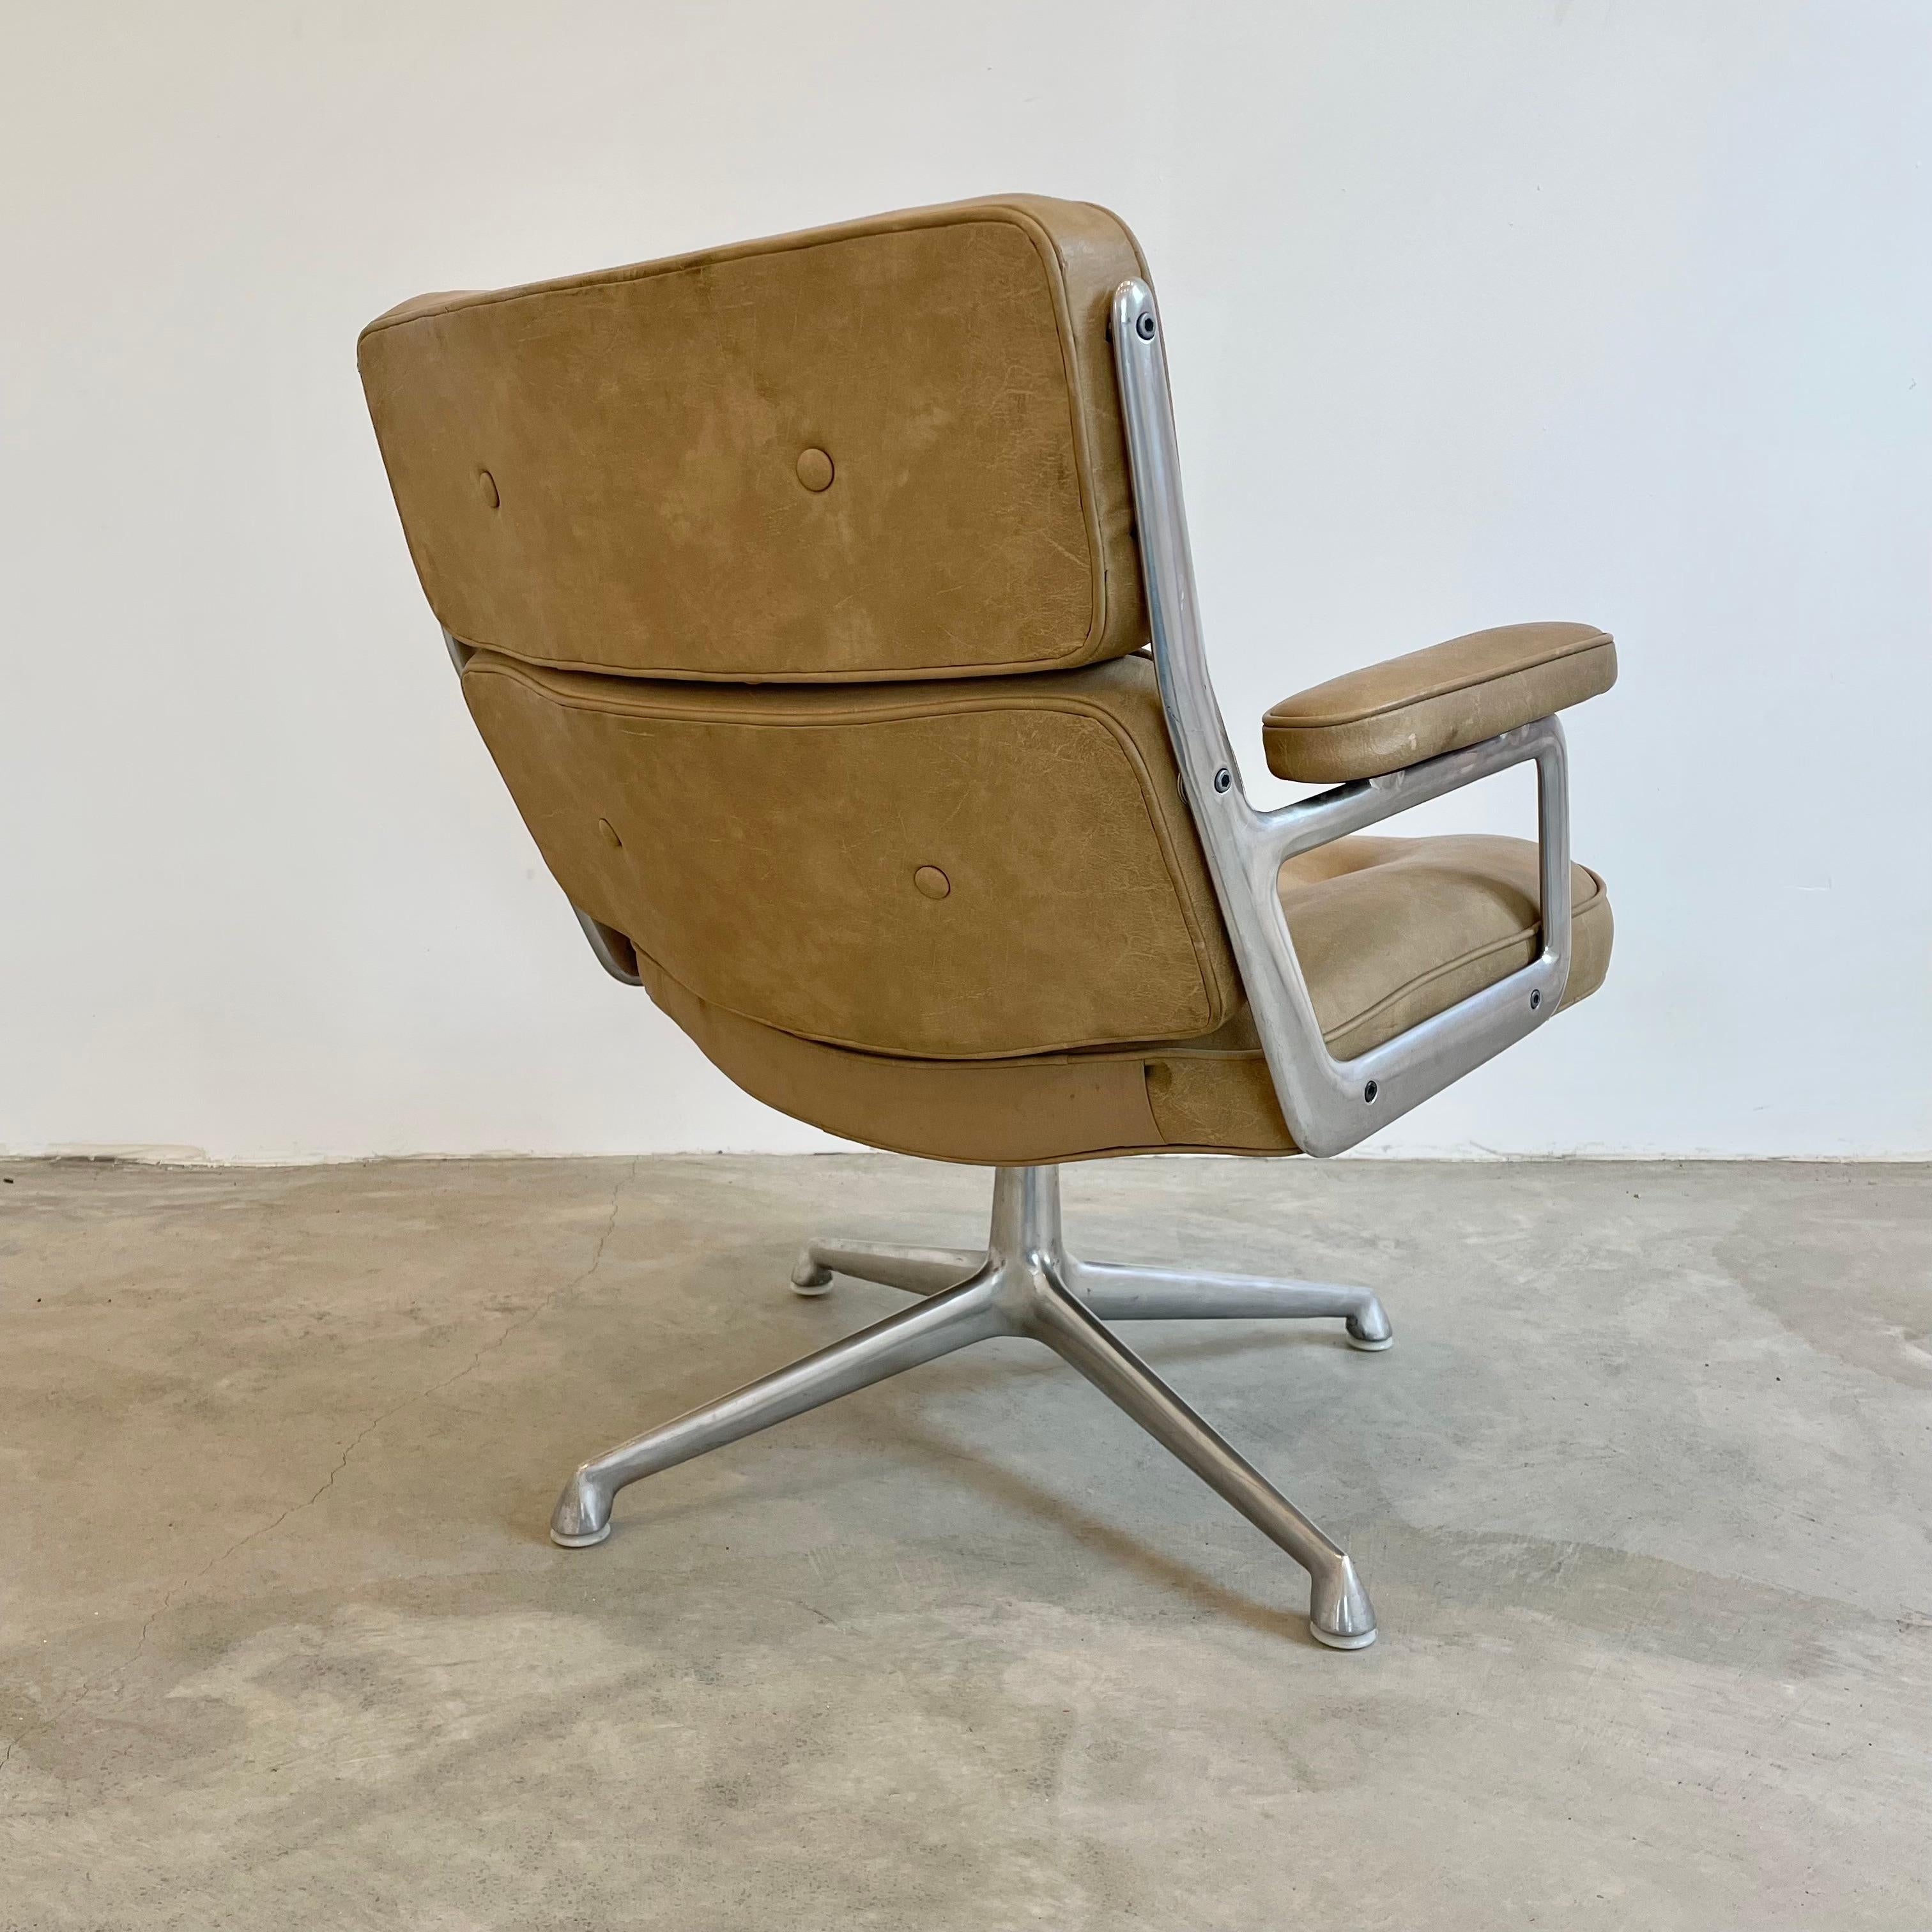 Classic Eames Time Life Lobby swivel chair in camel Skai for Herman Miller. Great color. Chair swivels. Metal and Skai are in good condition with wear as shown. Offered with original plastic caps or new casters. The perfect vintage office chair.